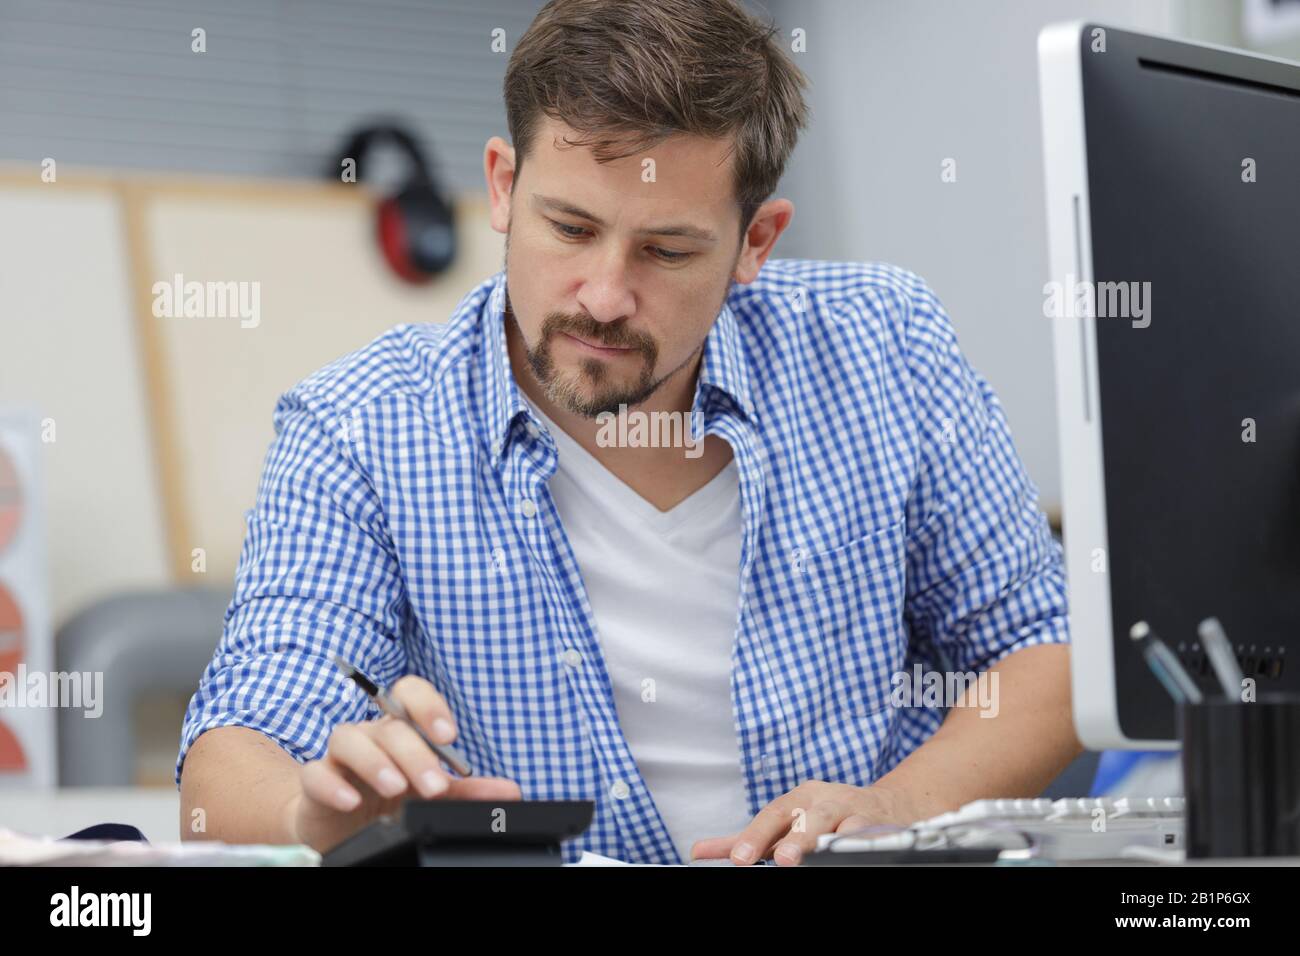 man doing accounts in the office Stock Photo